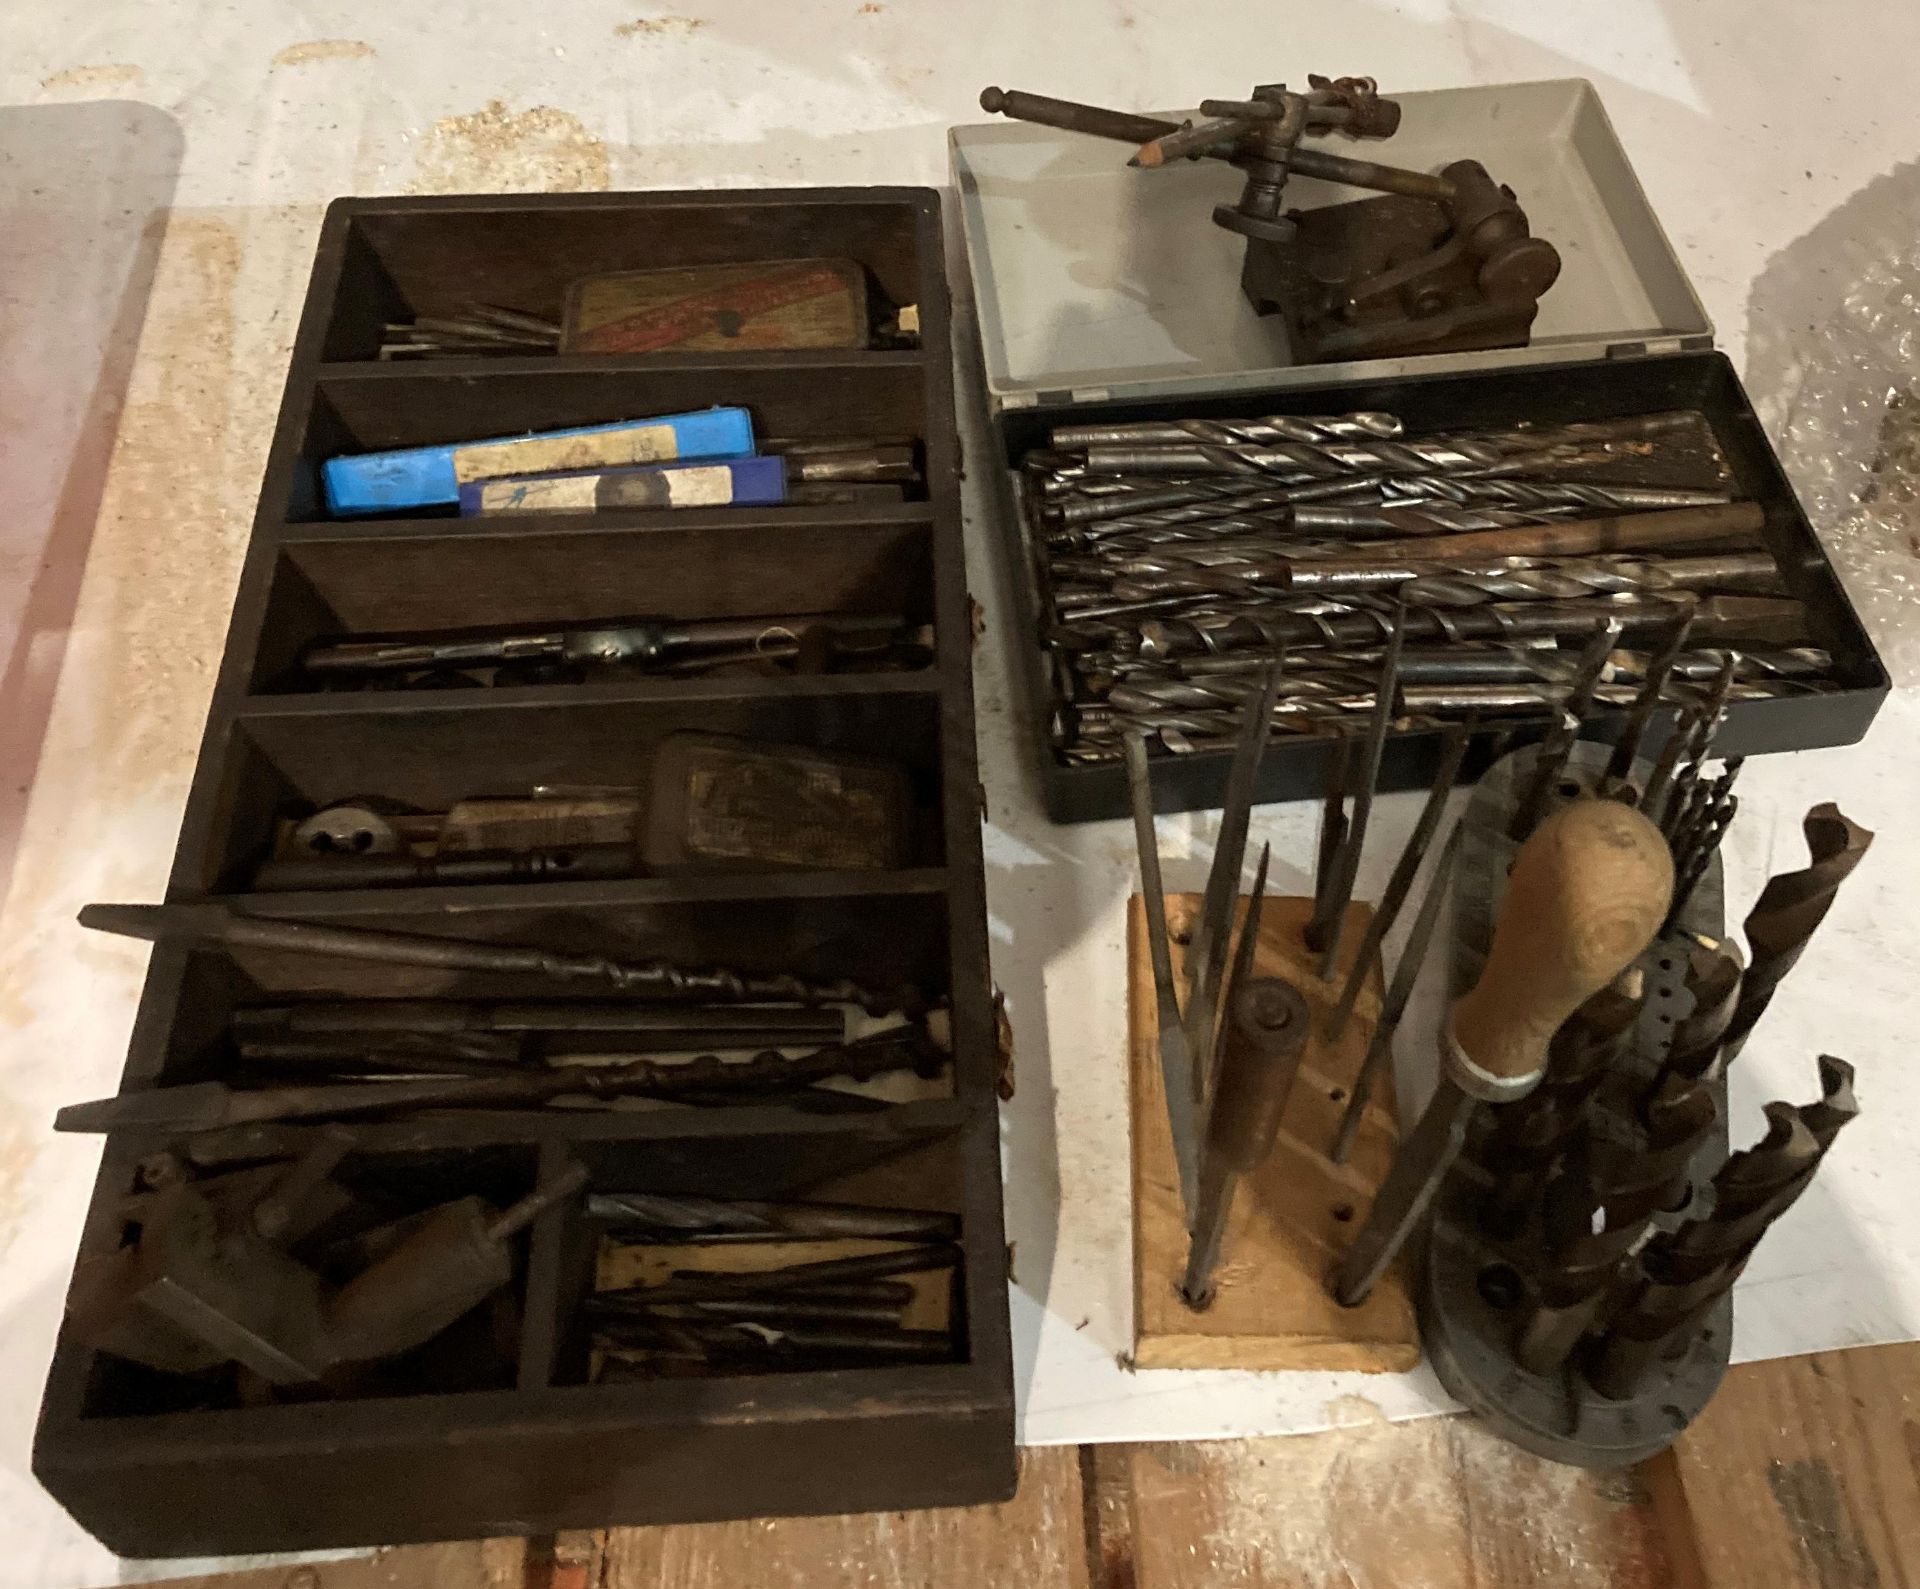 Contents to wooden tray - assorted tap and die bits, metal drill bit stand, files,